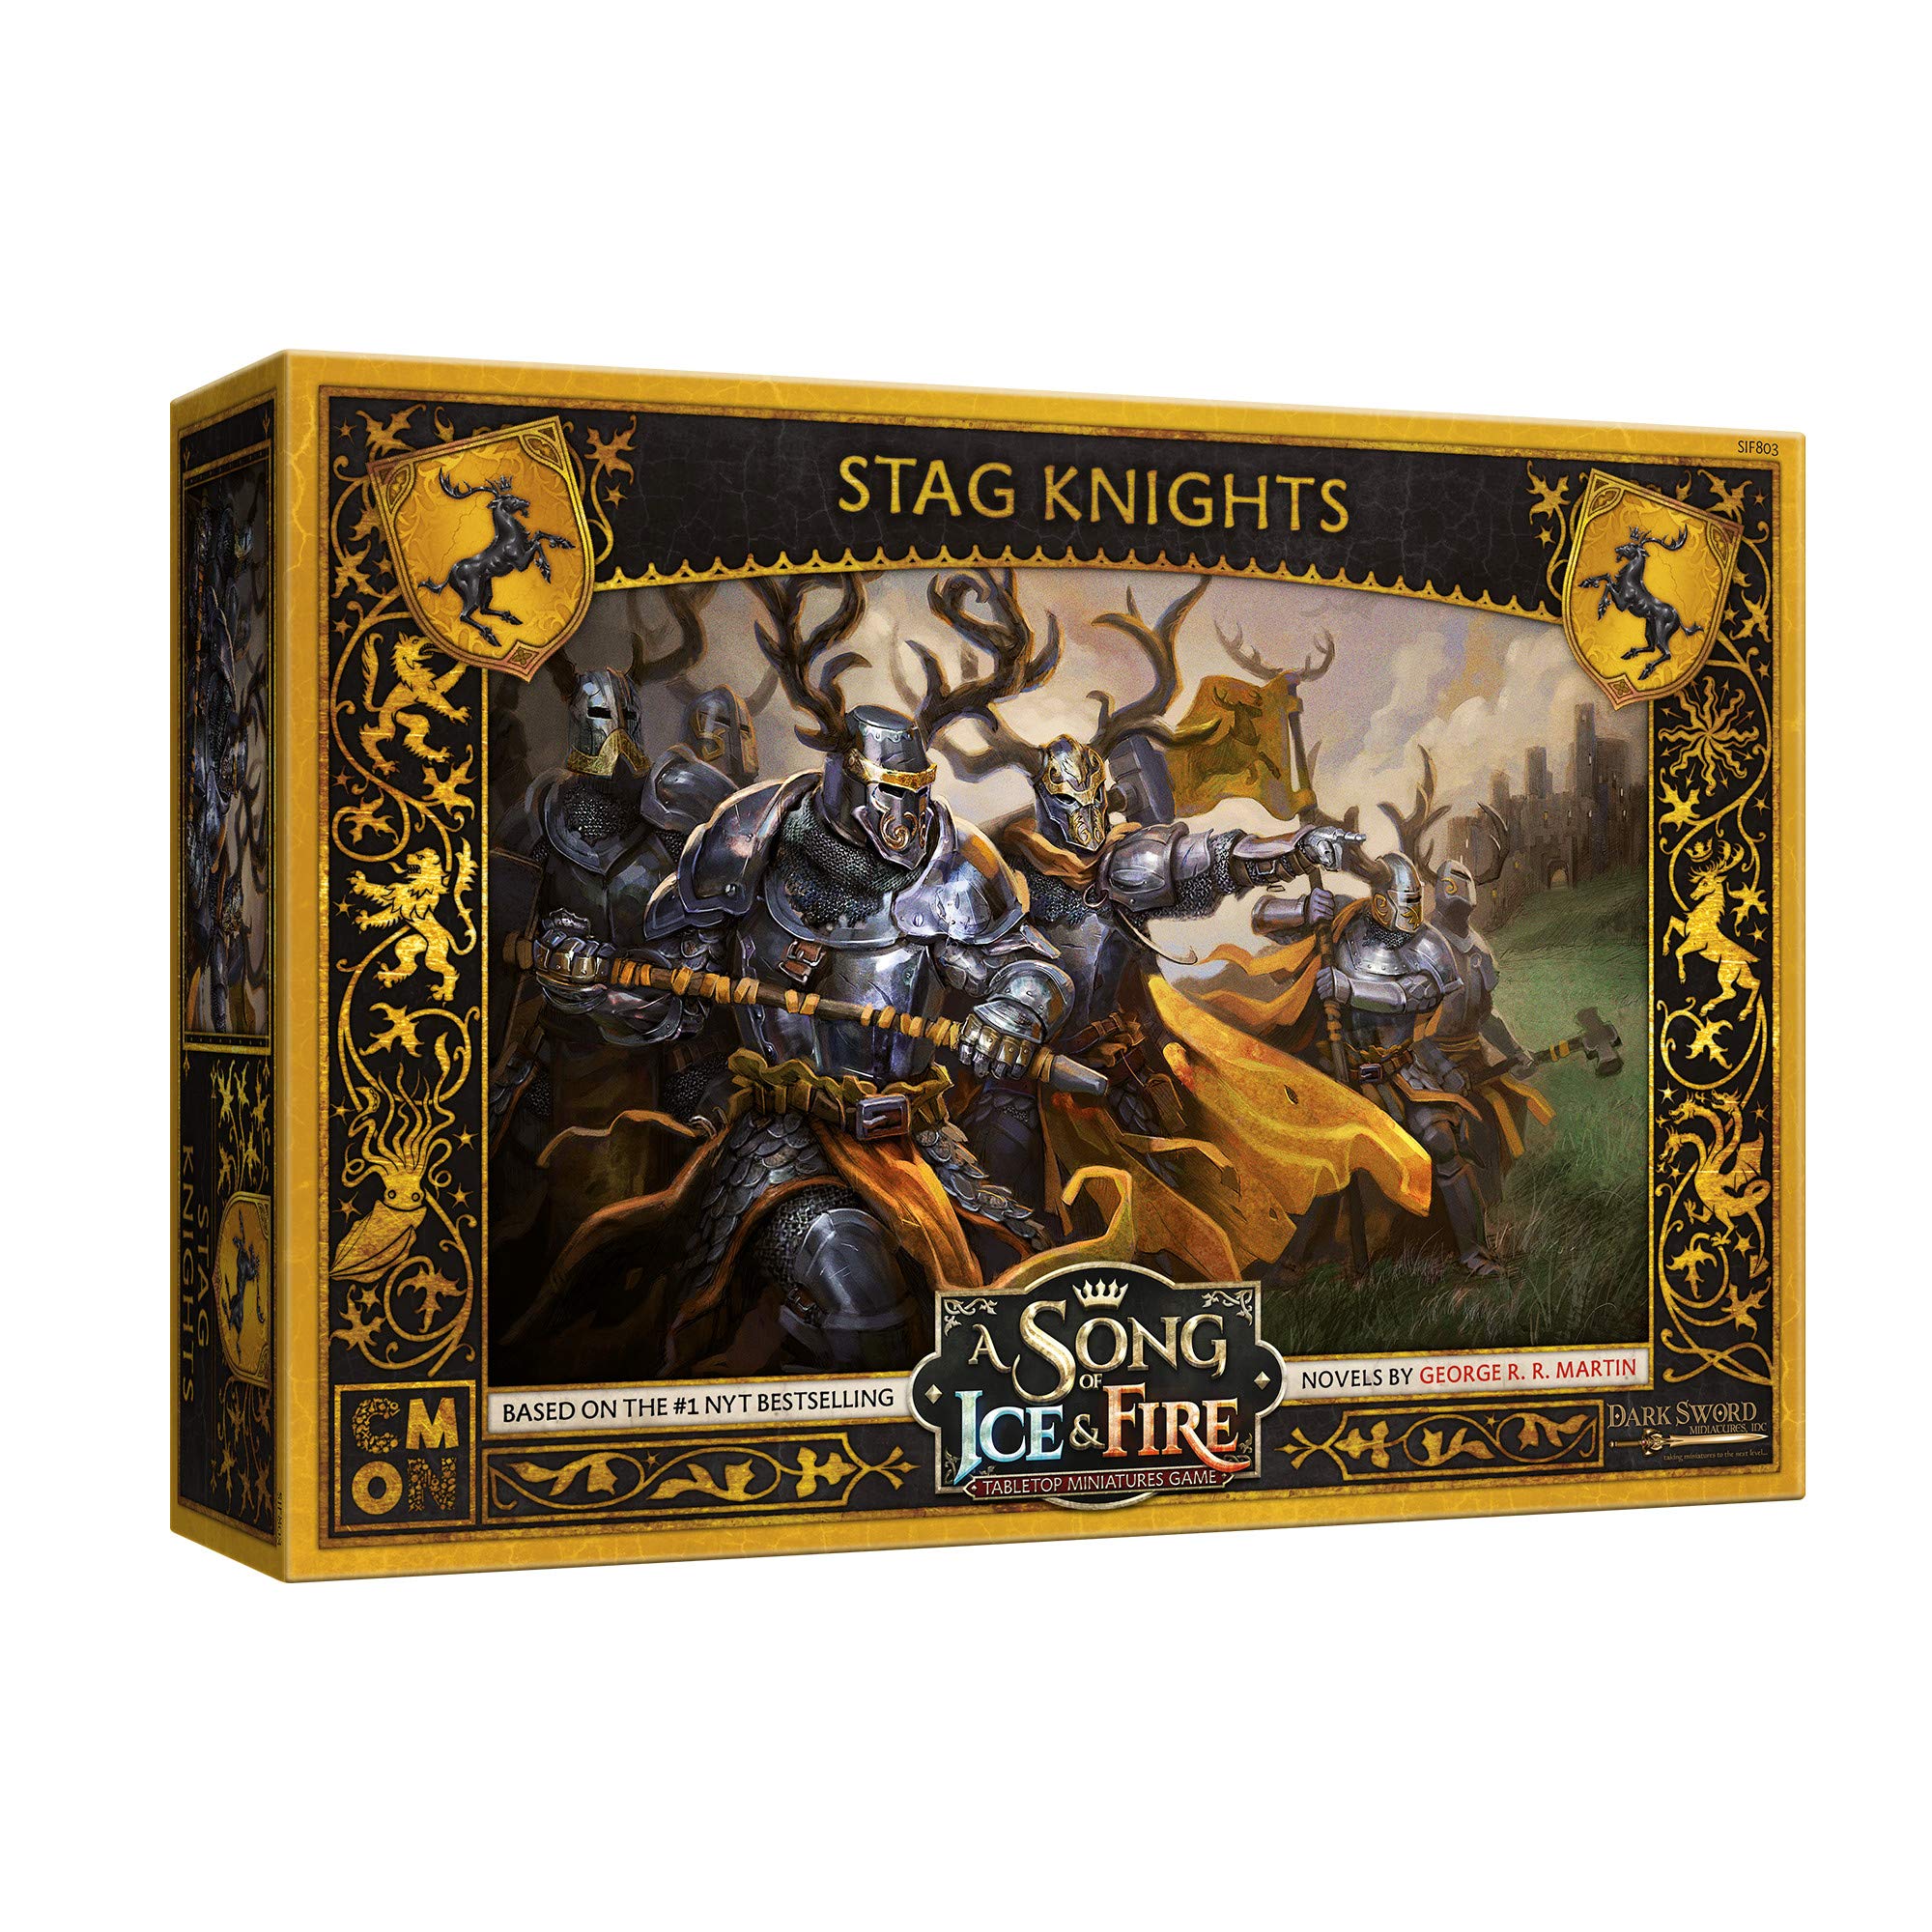 Cool Mini or Not - A Song of Ice and Fire: Stag Knights - Miniature Game